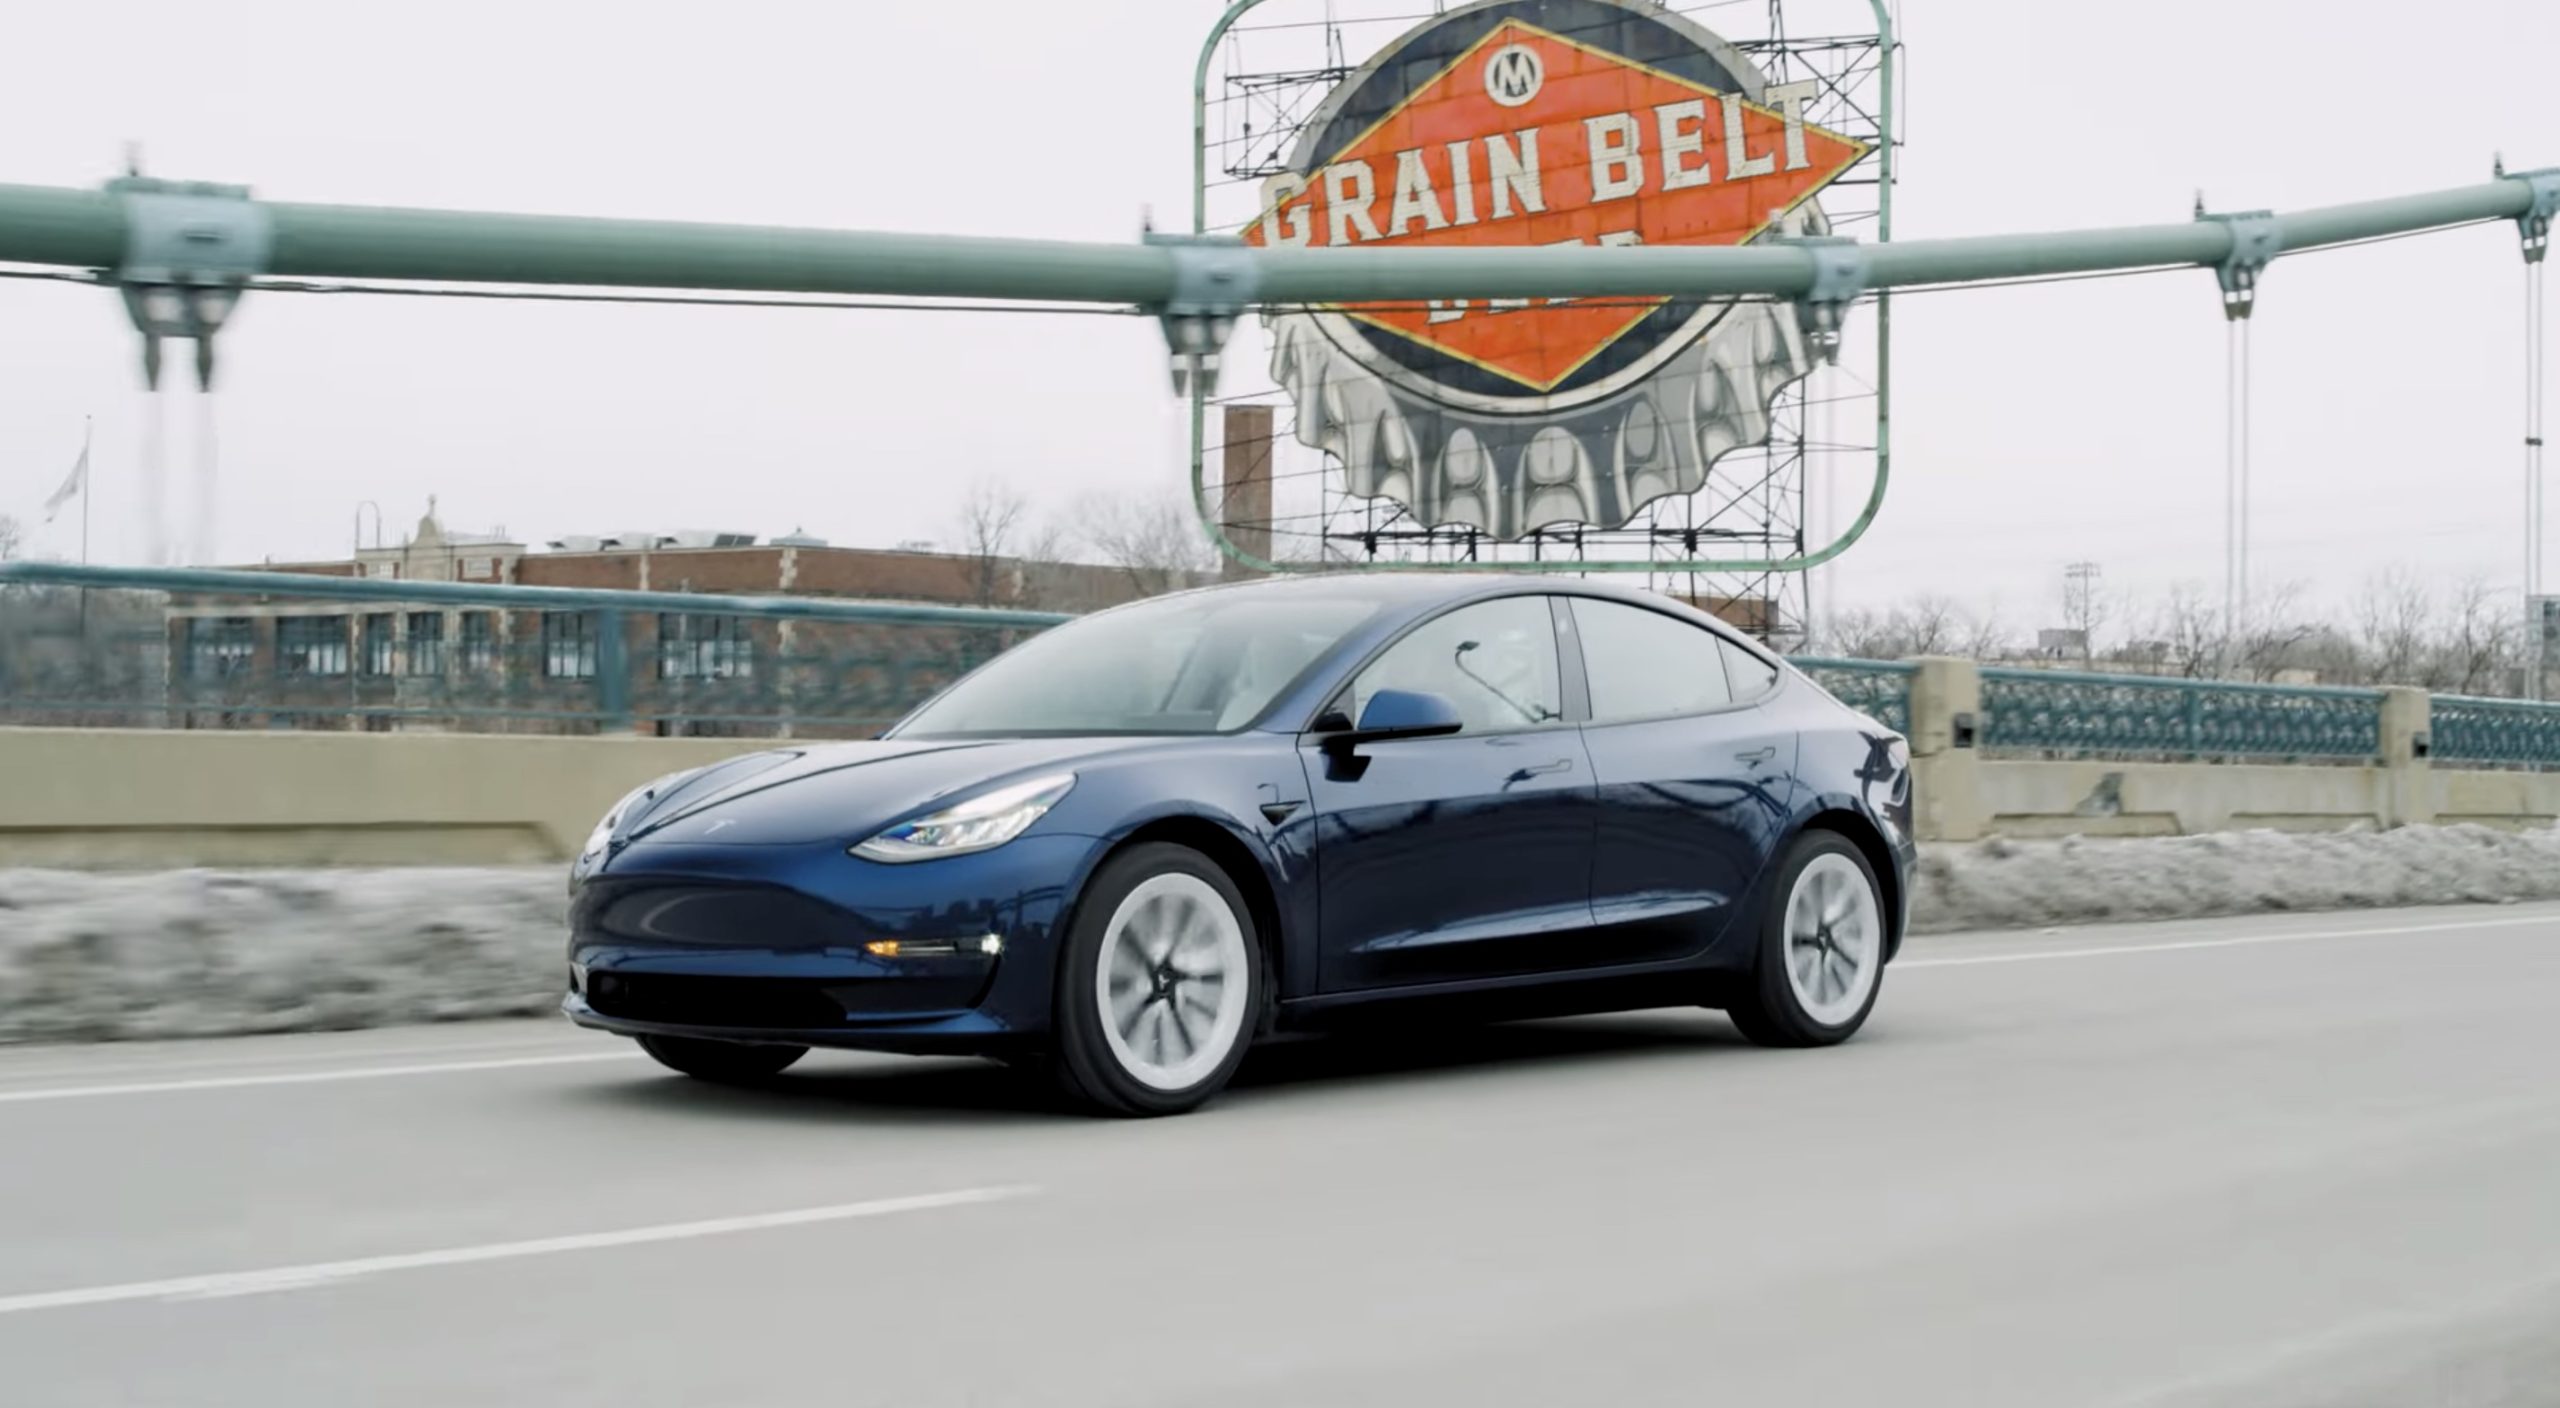 Used Tesla prices remain inflated despite price cut